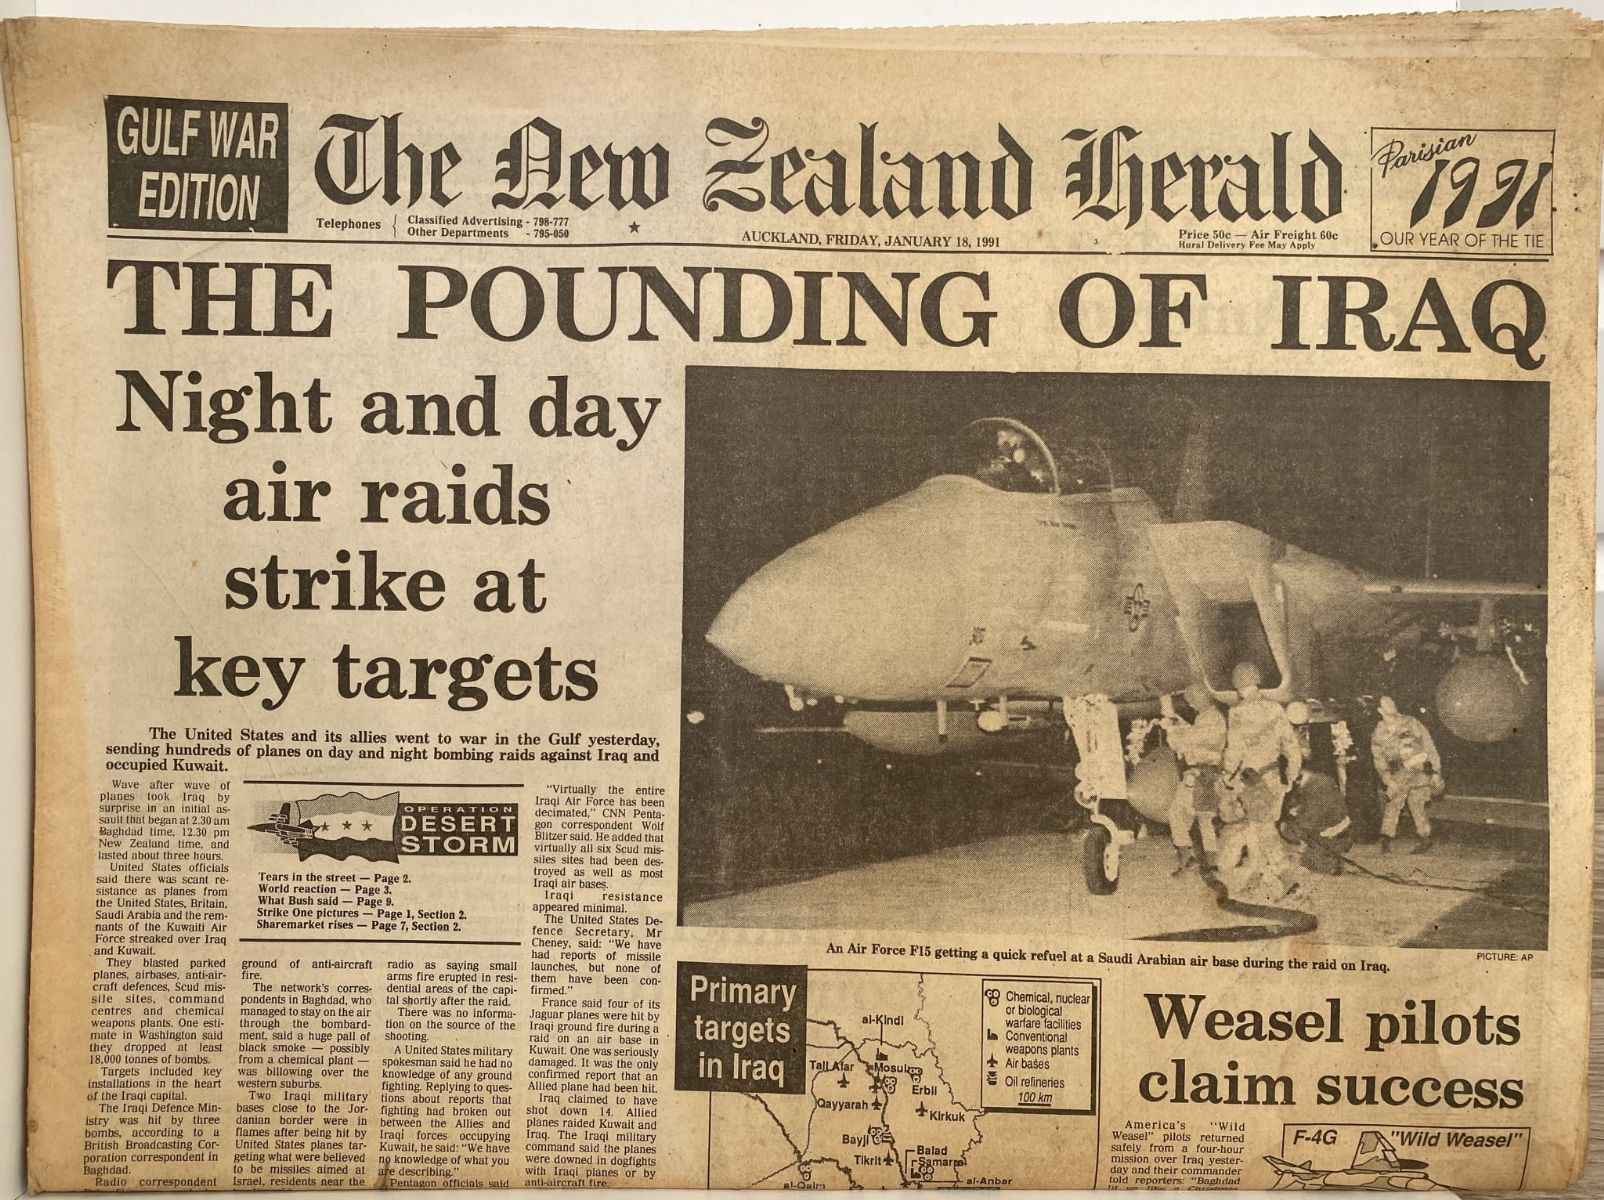 OLD NEWSPAPER: The New Zealand Herald, 18th January 1991 - Gulf War Edition